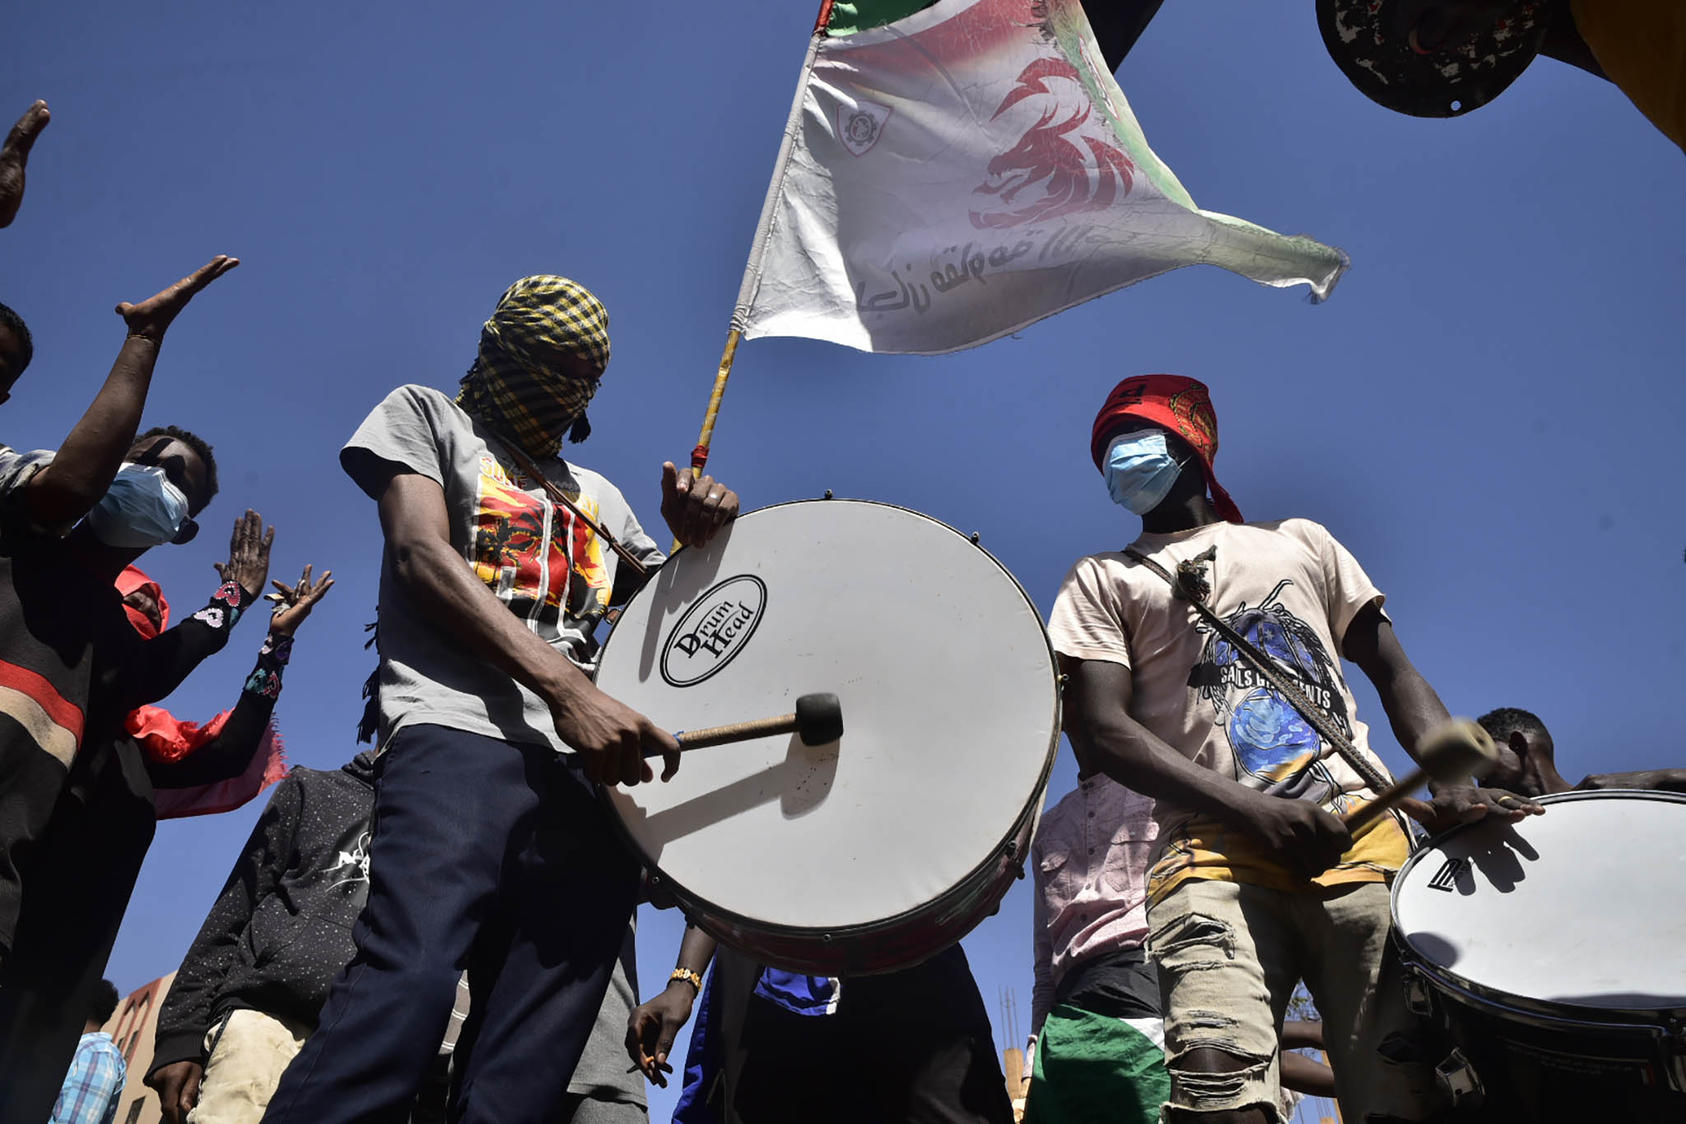 A demonstration in Khartoum, Sudan, where hundreds of loosely connected “resistance committees” are organizing nonviolent protests. January 24, 2022. (Faiz Abubakar Muhamed/The New York Times)